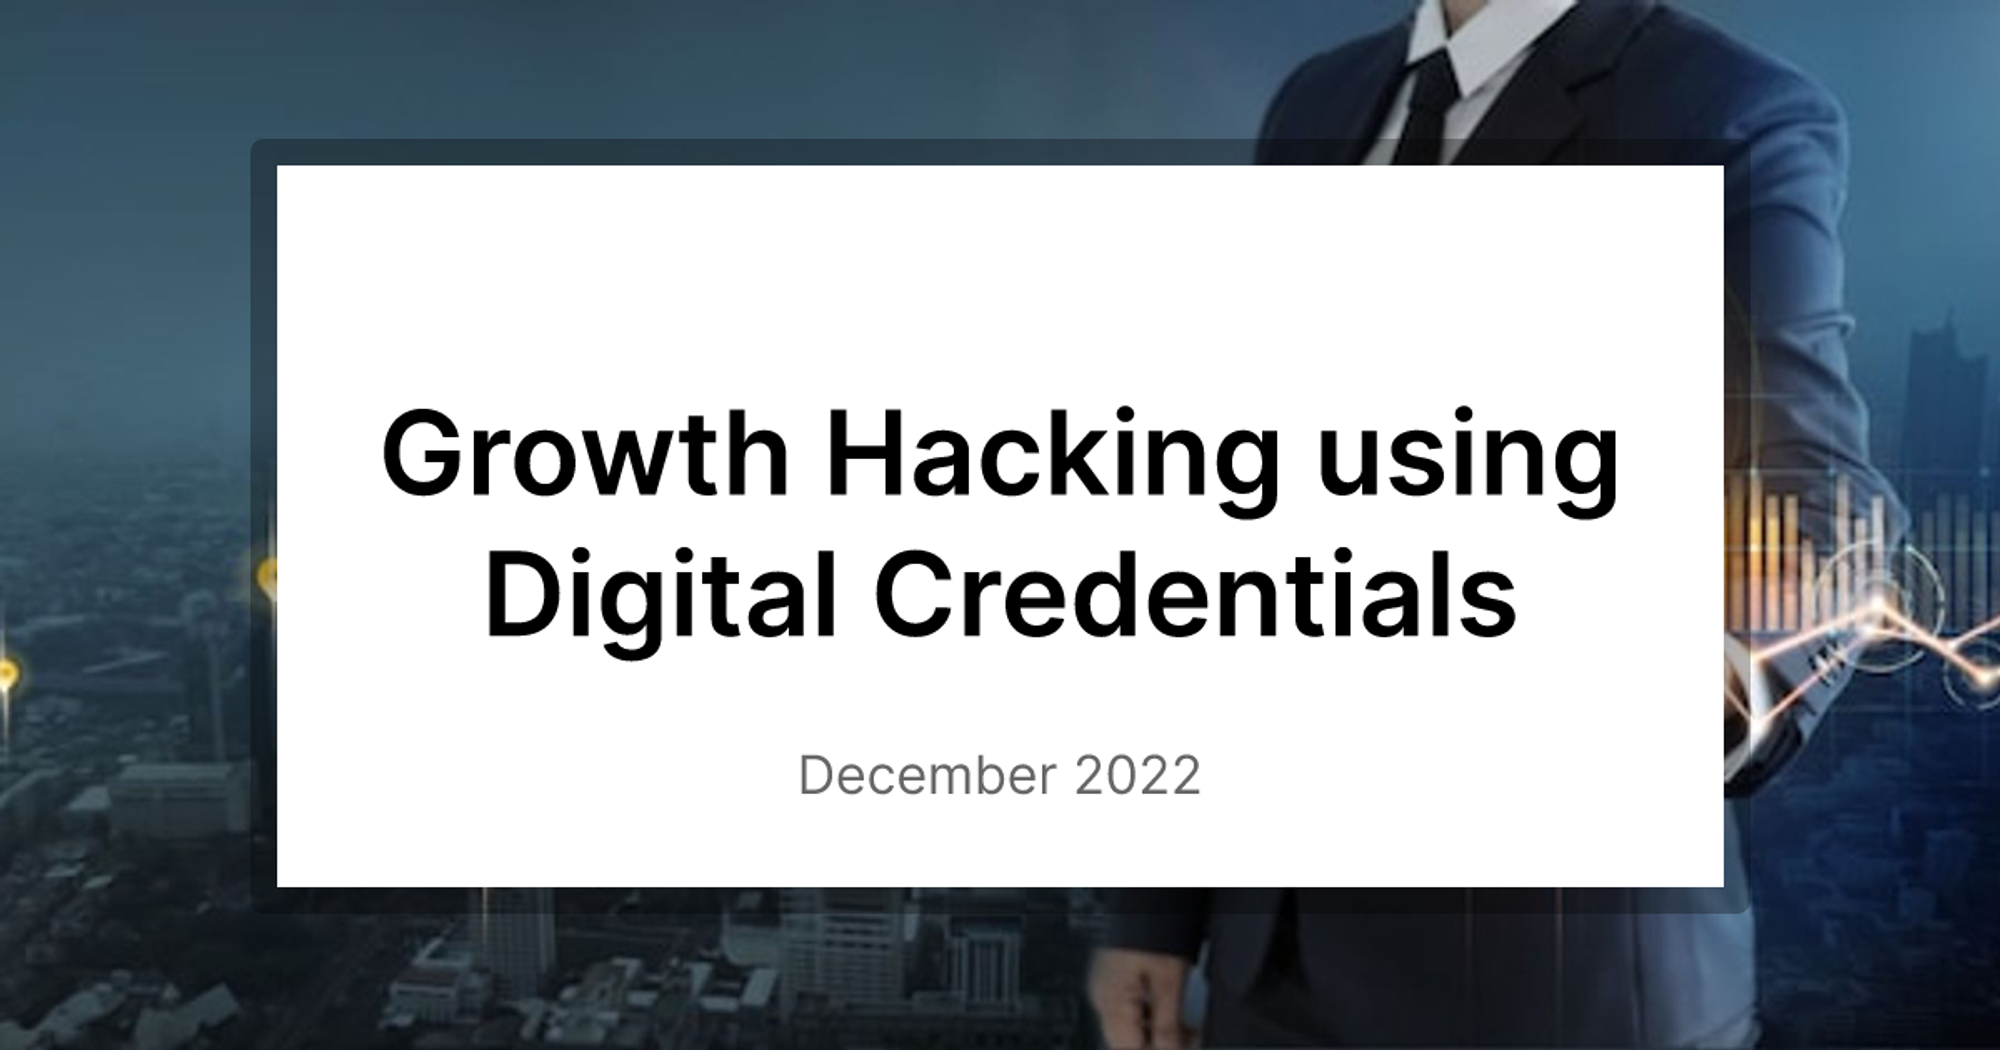 Growth Hacking using Digital Credentials